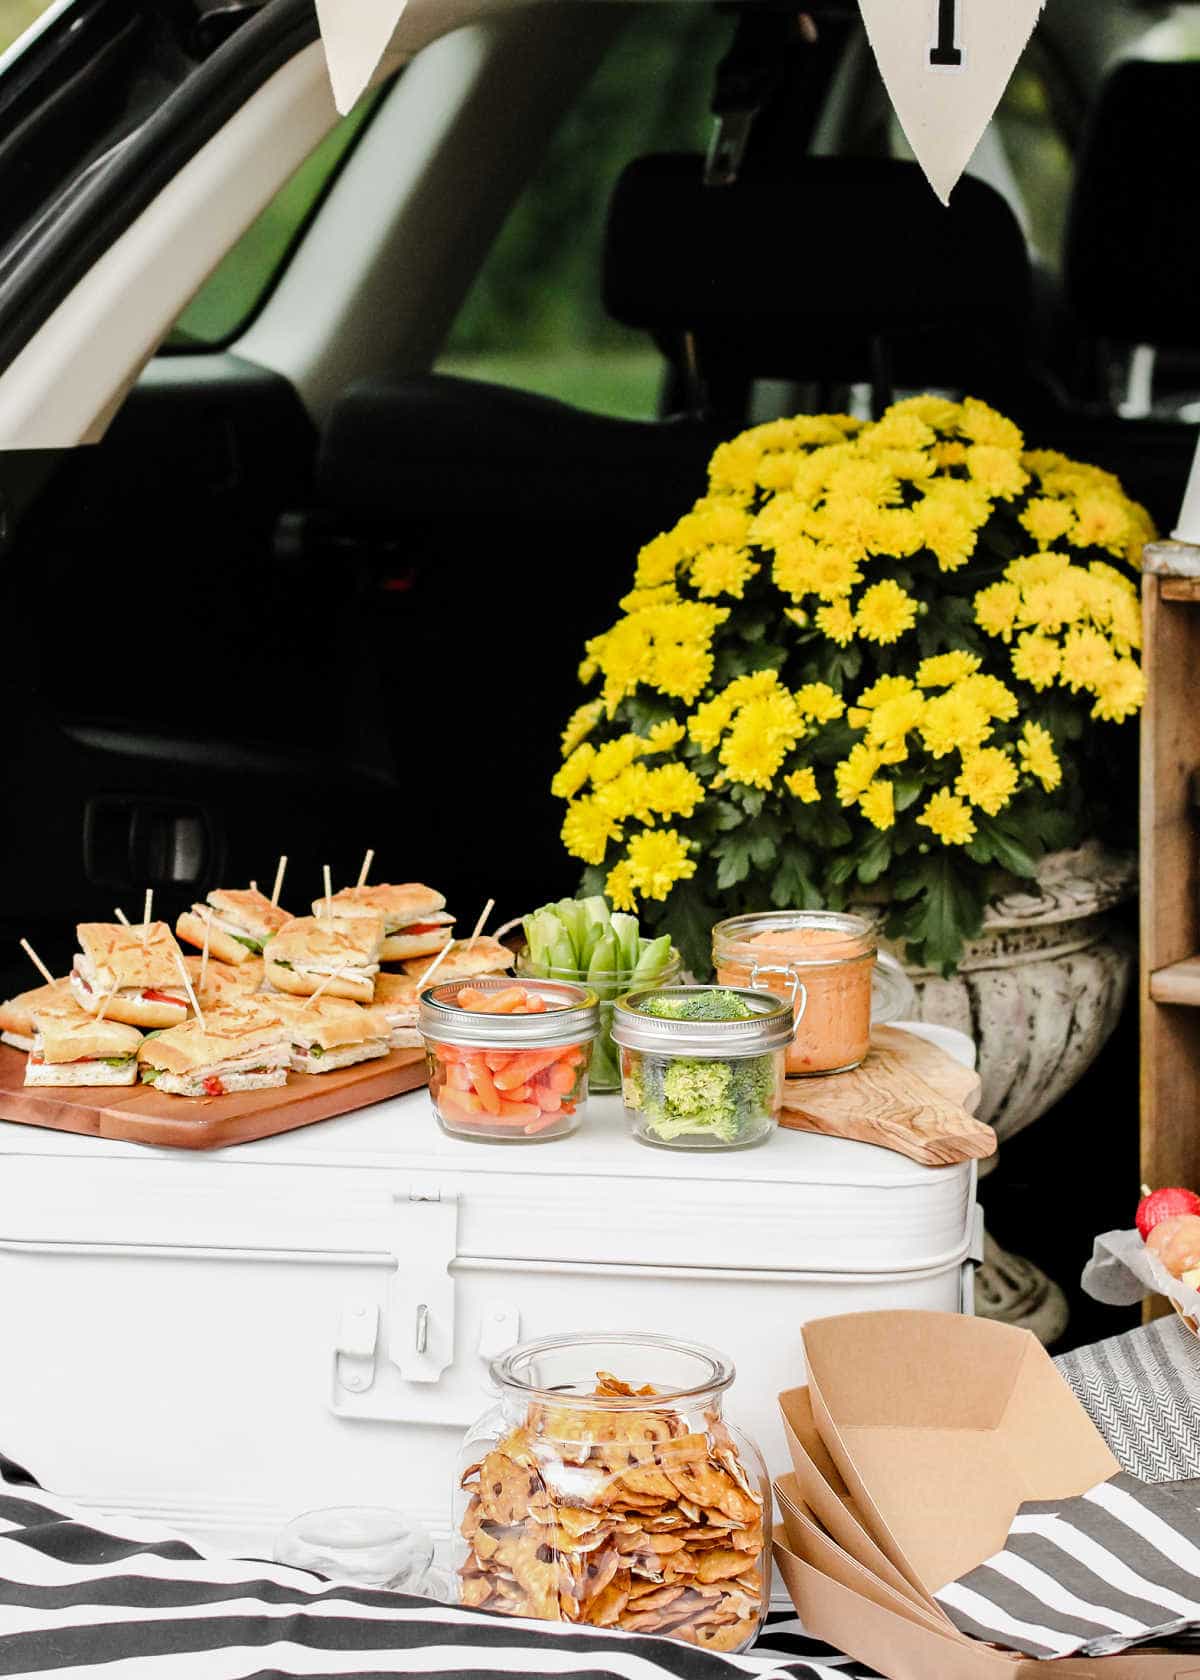 tailgating picnic set up in back of vehicle.